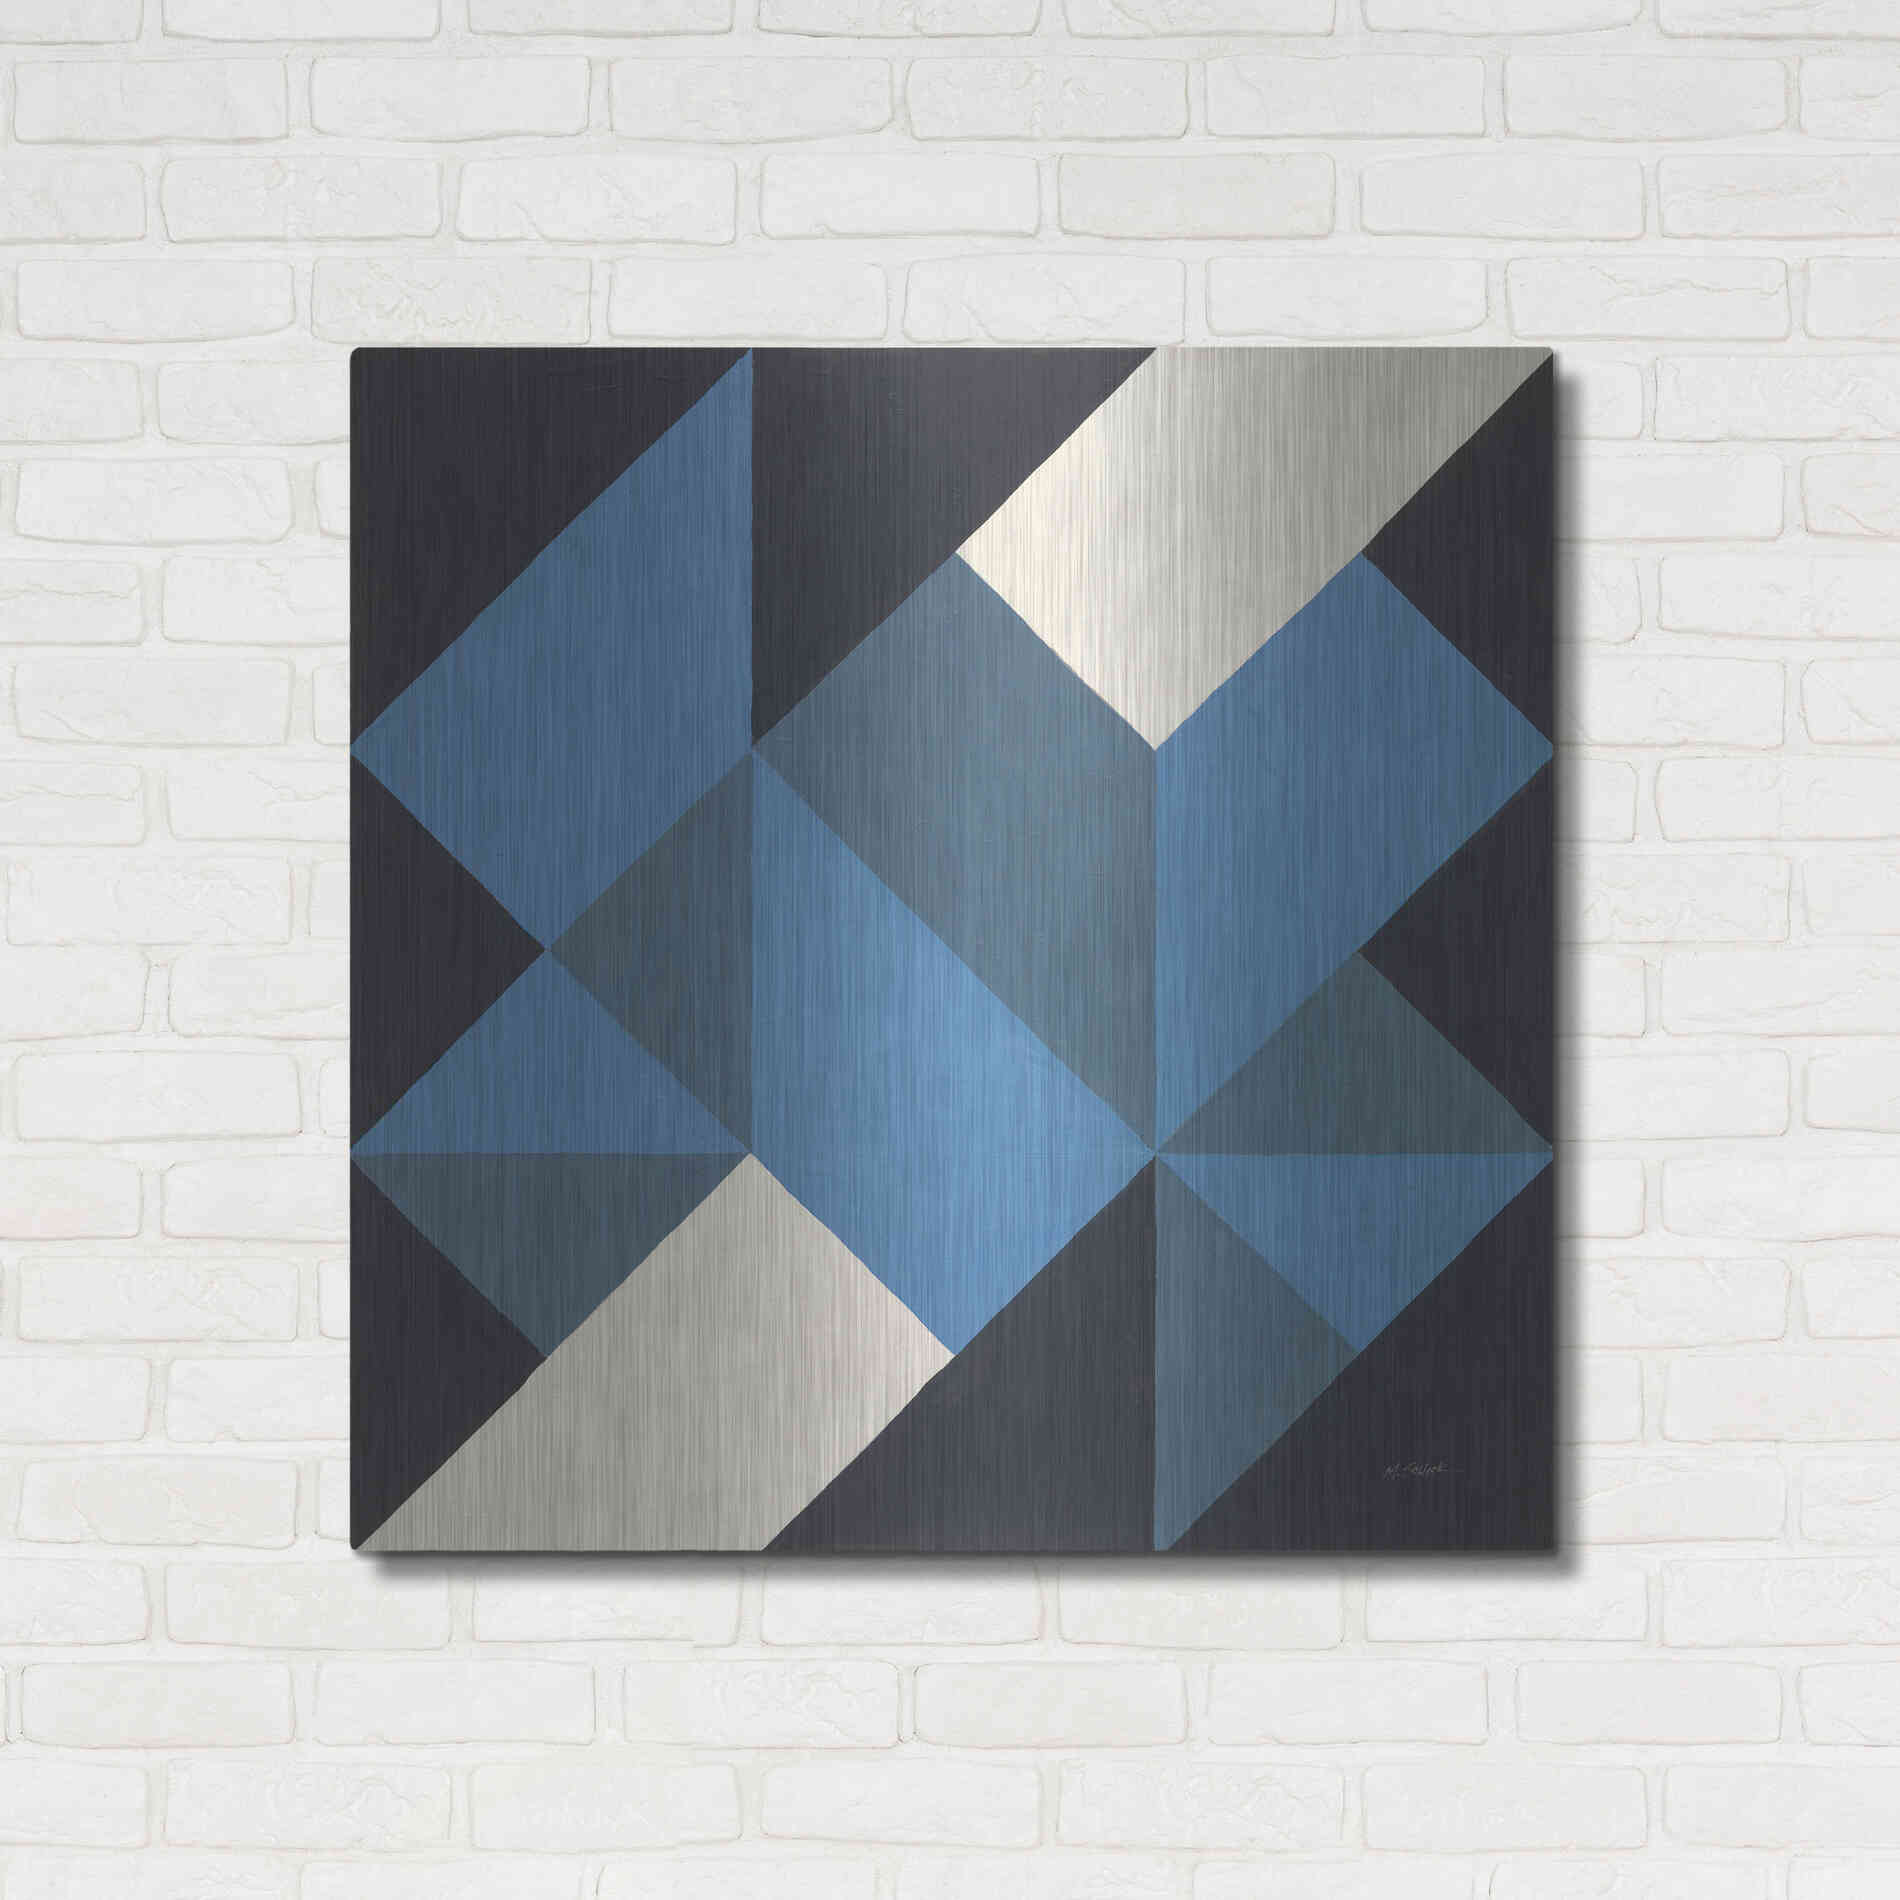 Luxe Metal Art 'Triangles I' by Mike Schick, Metal Wall Art,36x36